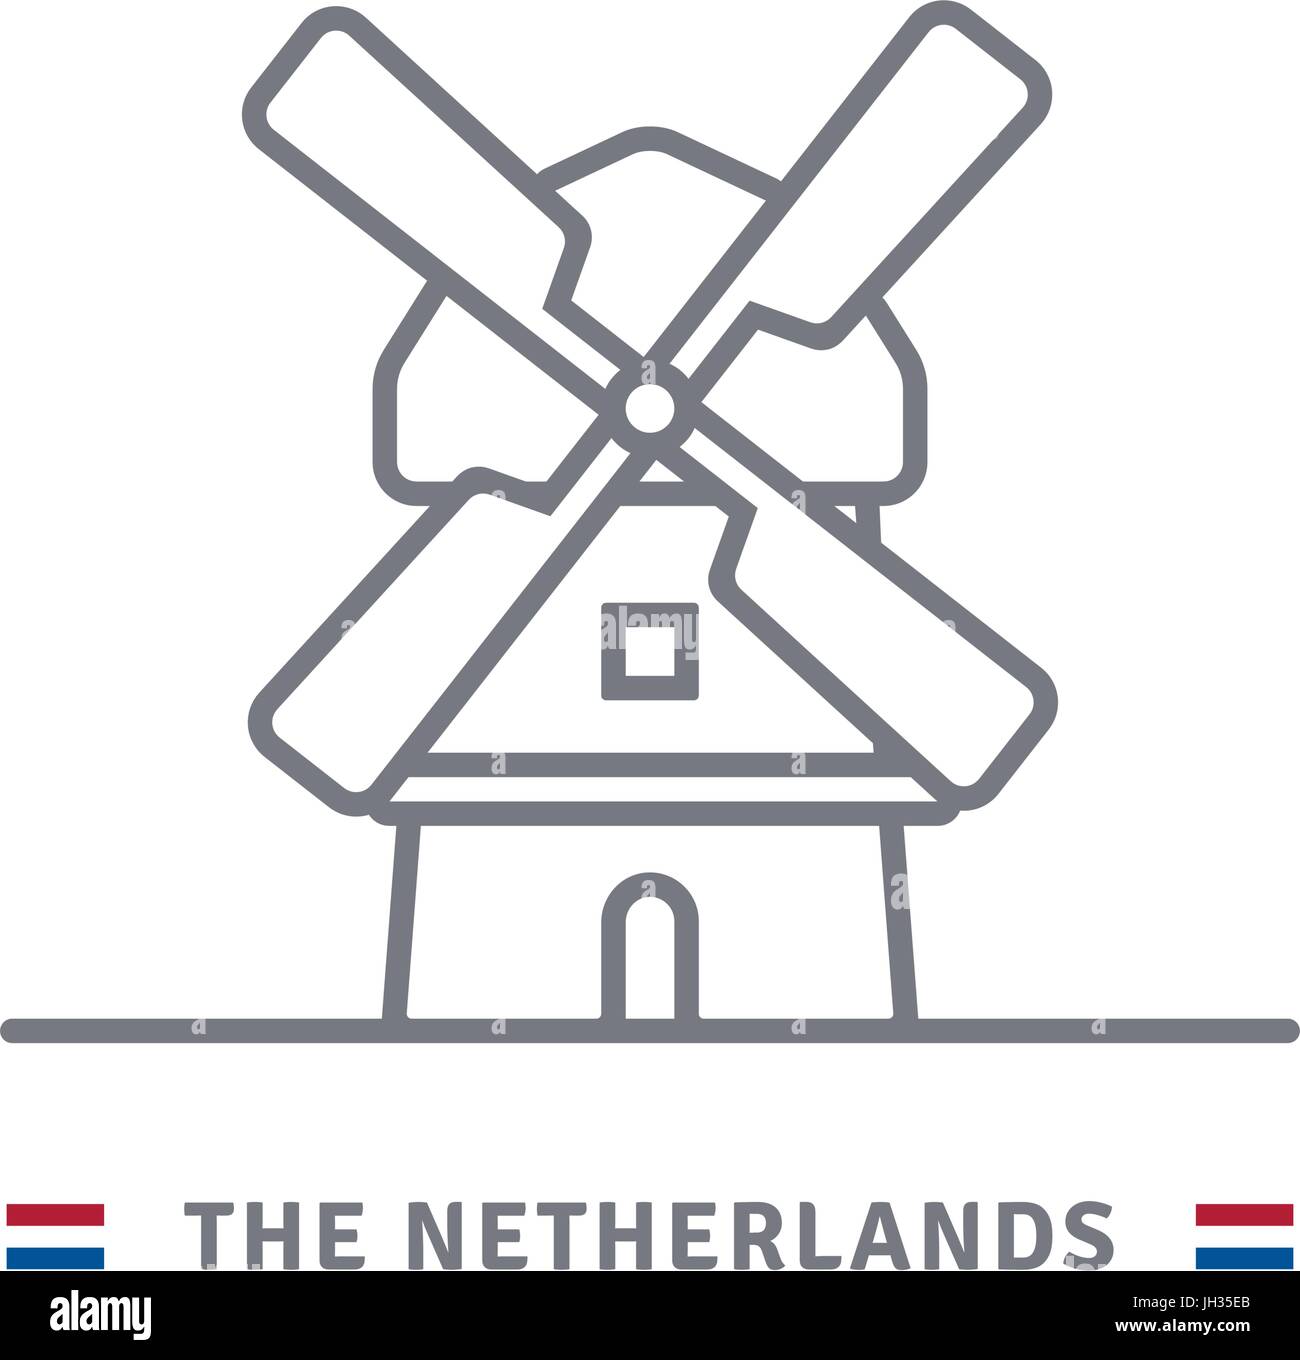 The Netherlands line icon Dutch windmill and flag vector illustration. Stock Vector